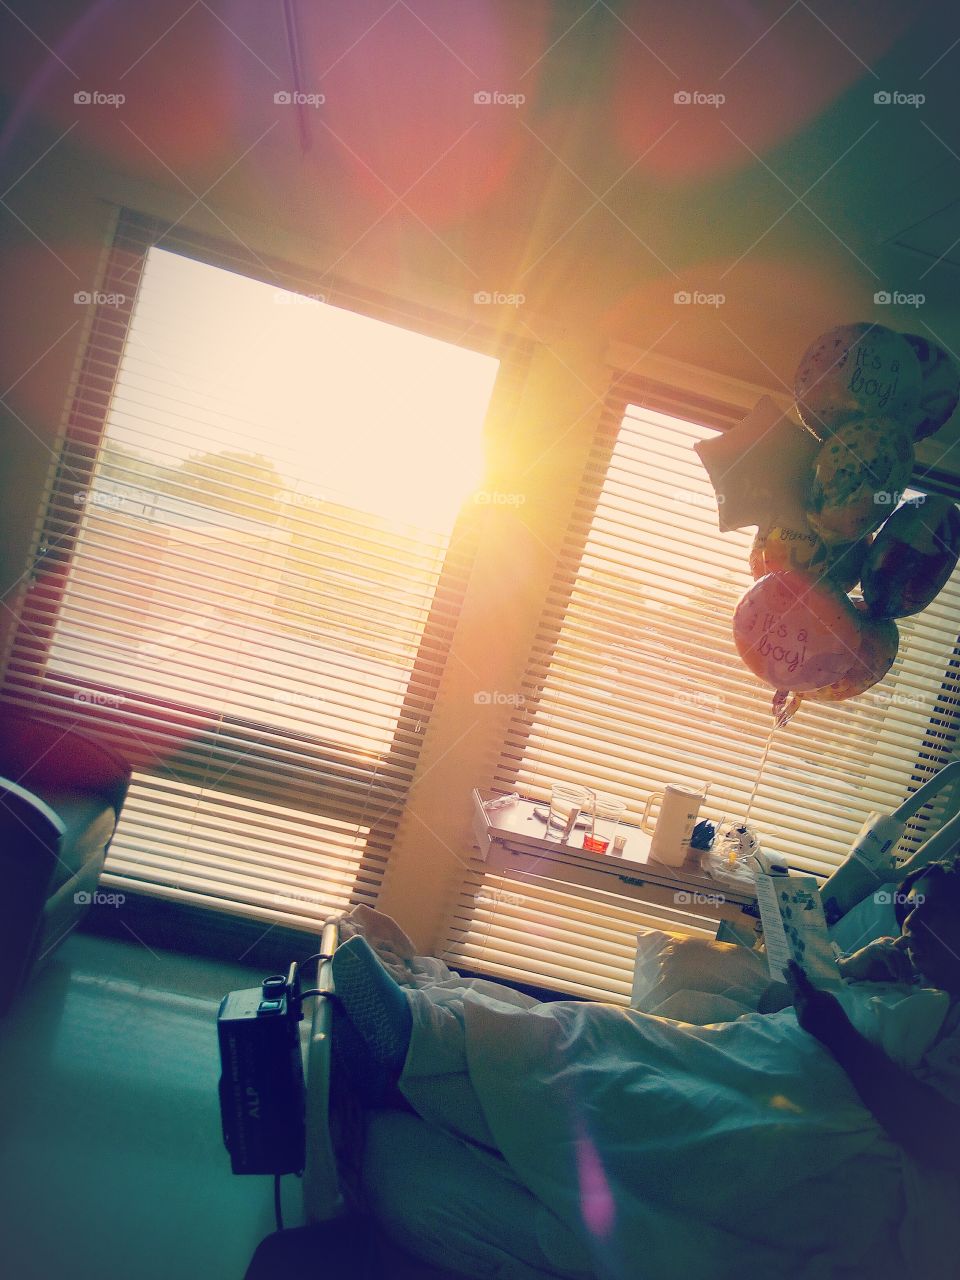 Early Morning In hospital, After welcoming a baby into the world. ♡